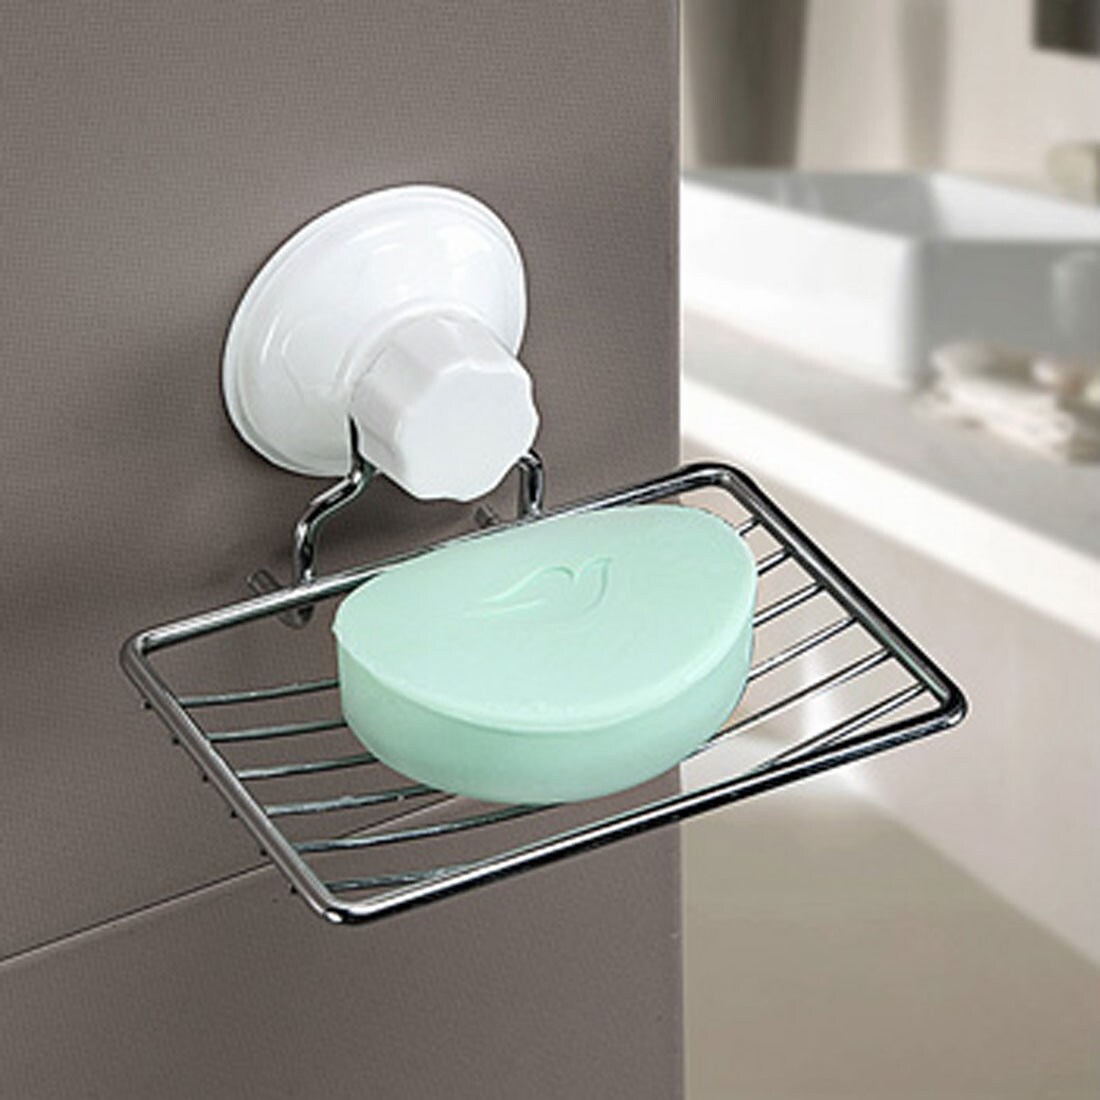 https://ak1.ostkcdn.com/images/products/is/images/direct/f772c4080e8a2fc287c3db9400bb089a3dbe3dcb/Bathroom-Metal-Wall-Mounted-Suction-Cup-Soap-Rack-Holder-Dispenser-Silver-Tone.jpg